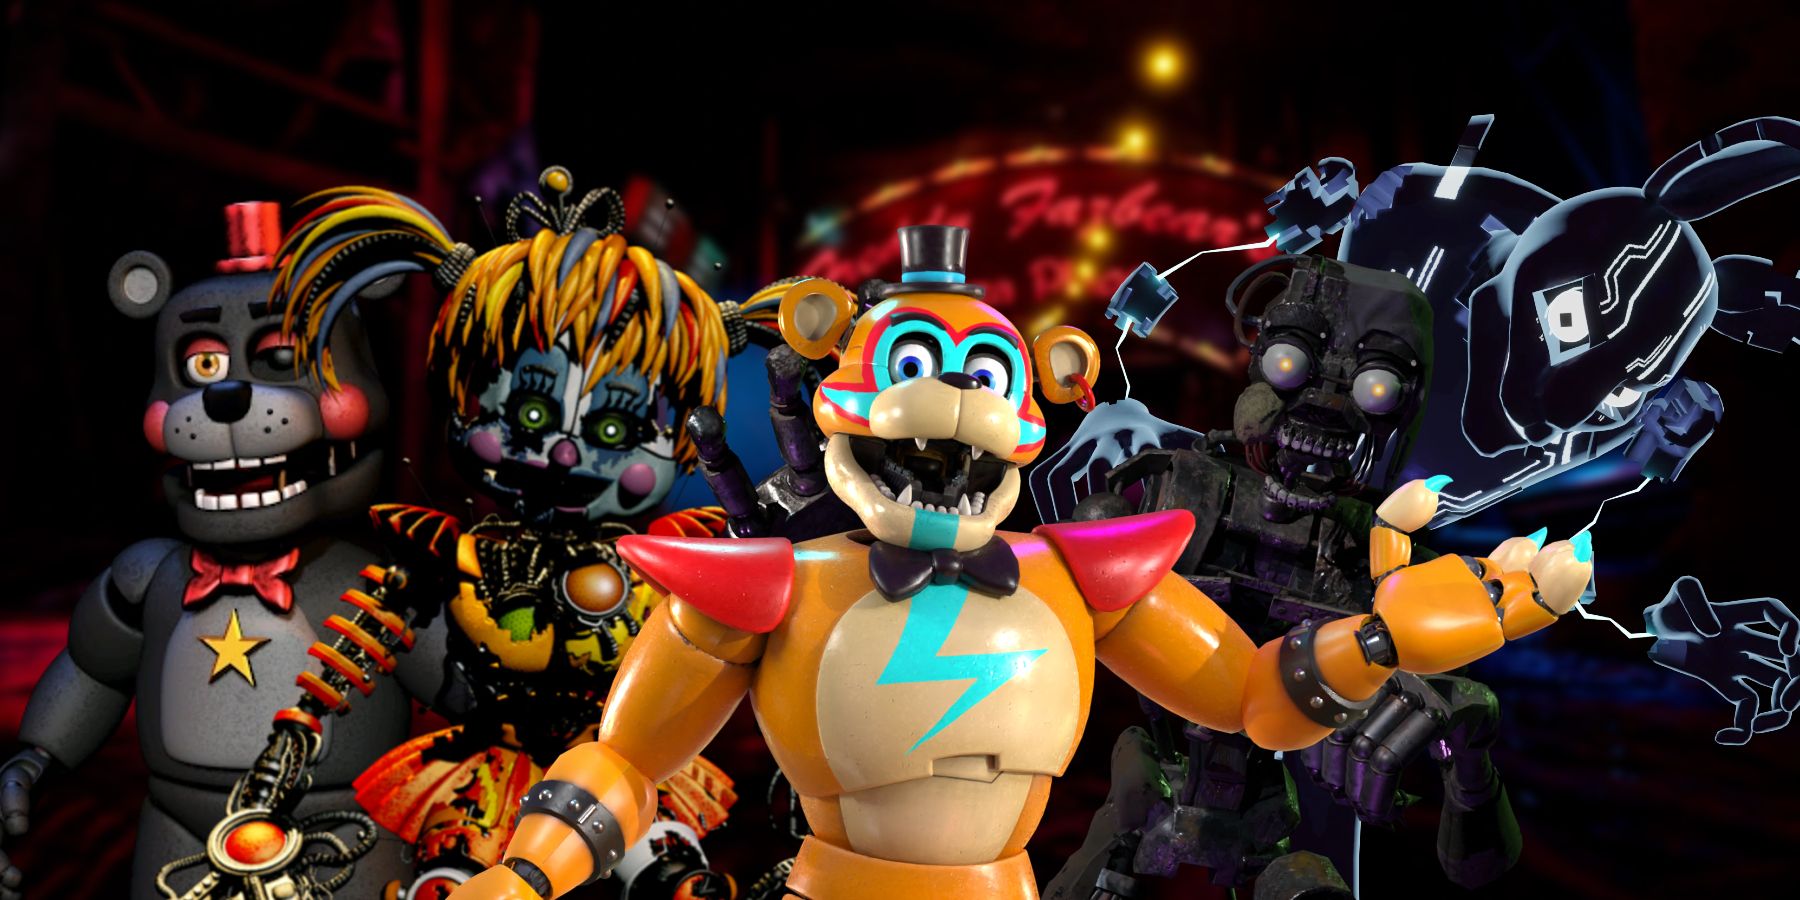 FNAF games in order, Five Nights at Freddy's release and story order